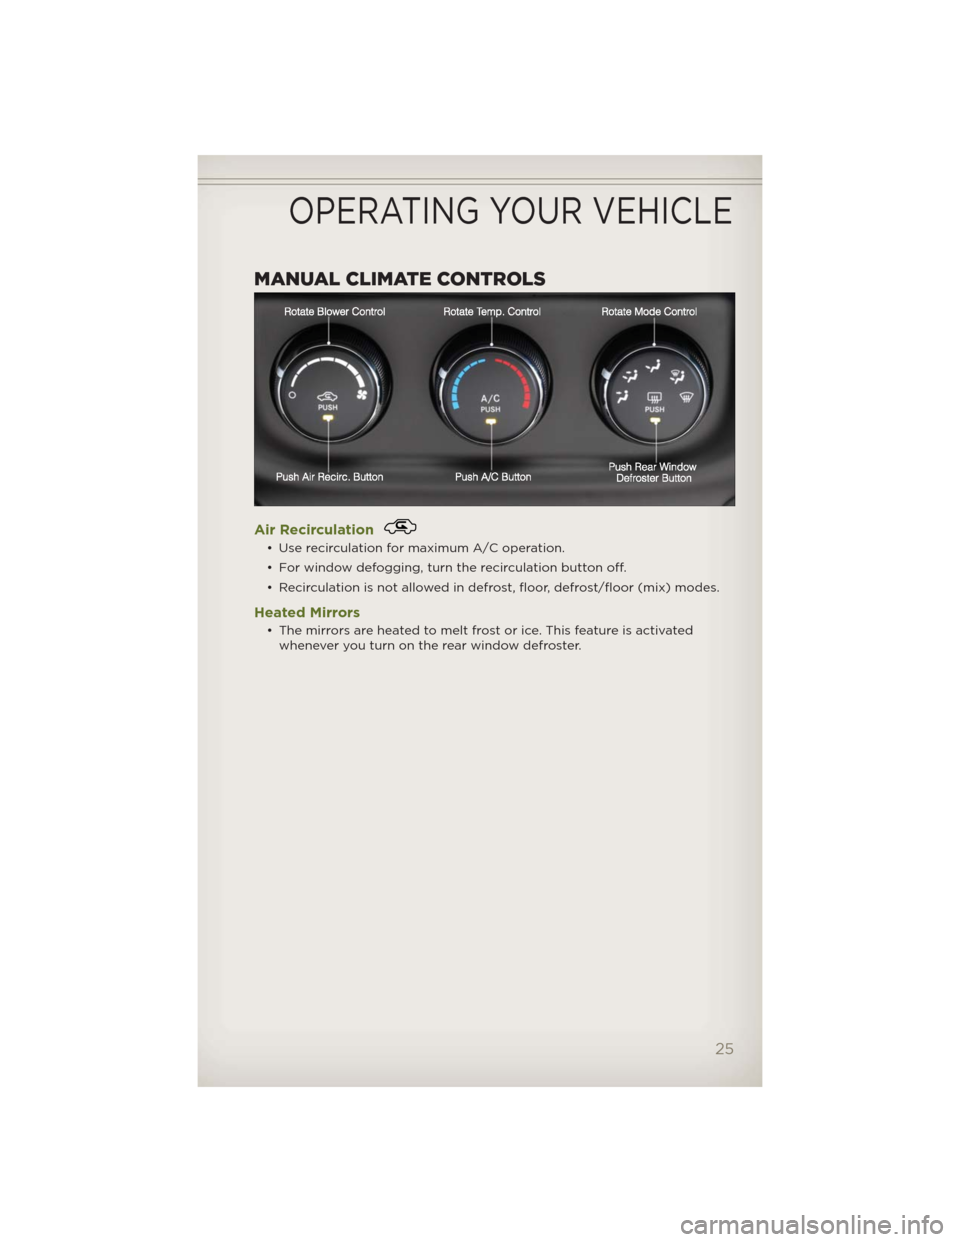 JEEP WRANGLER 2012 JK / 3.G Owners Manual MANUAL CLIMATE CONTROLS
Air Recirculation
• Use recirculation for maximum A/C operation.
• For window defogging, turn the recirculation button off.
• Recirculation is not allowed in defrost, flo